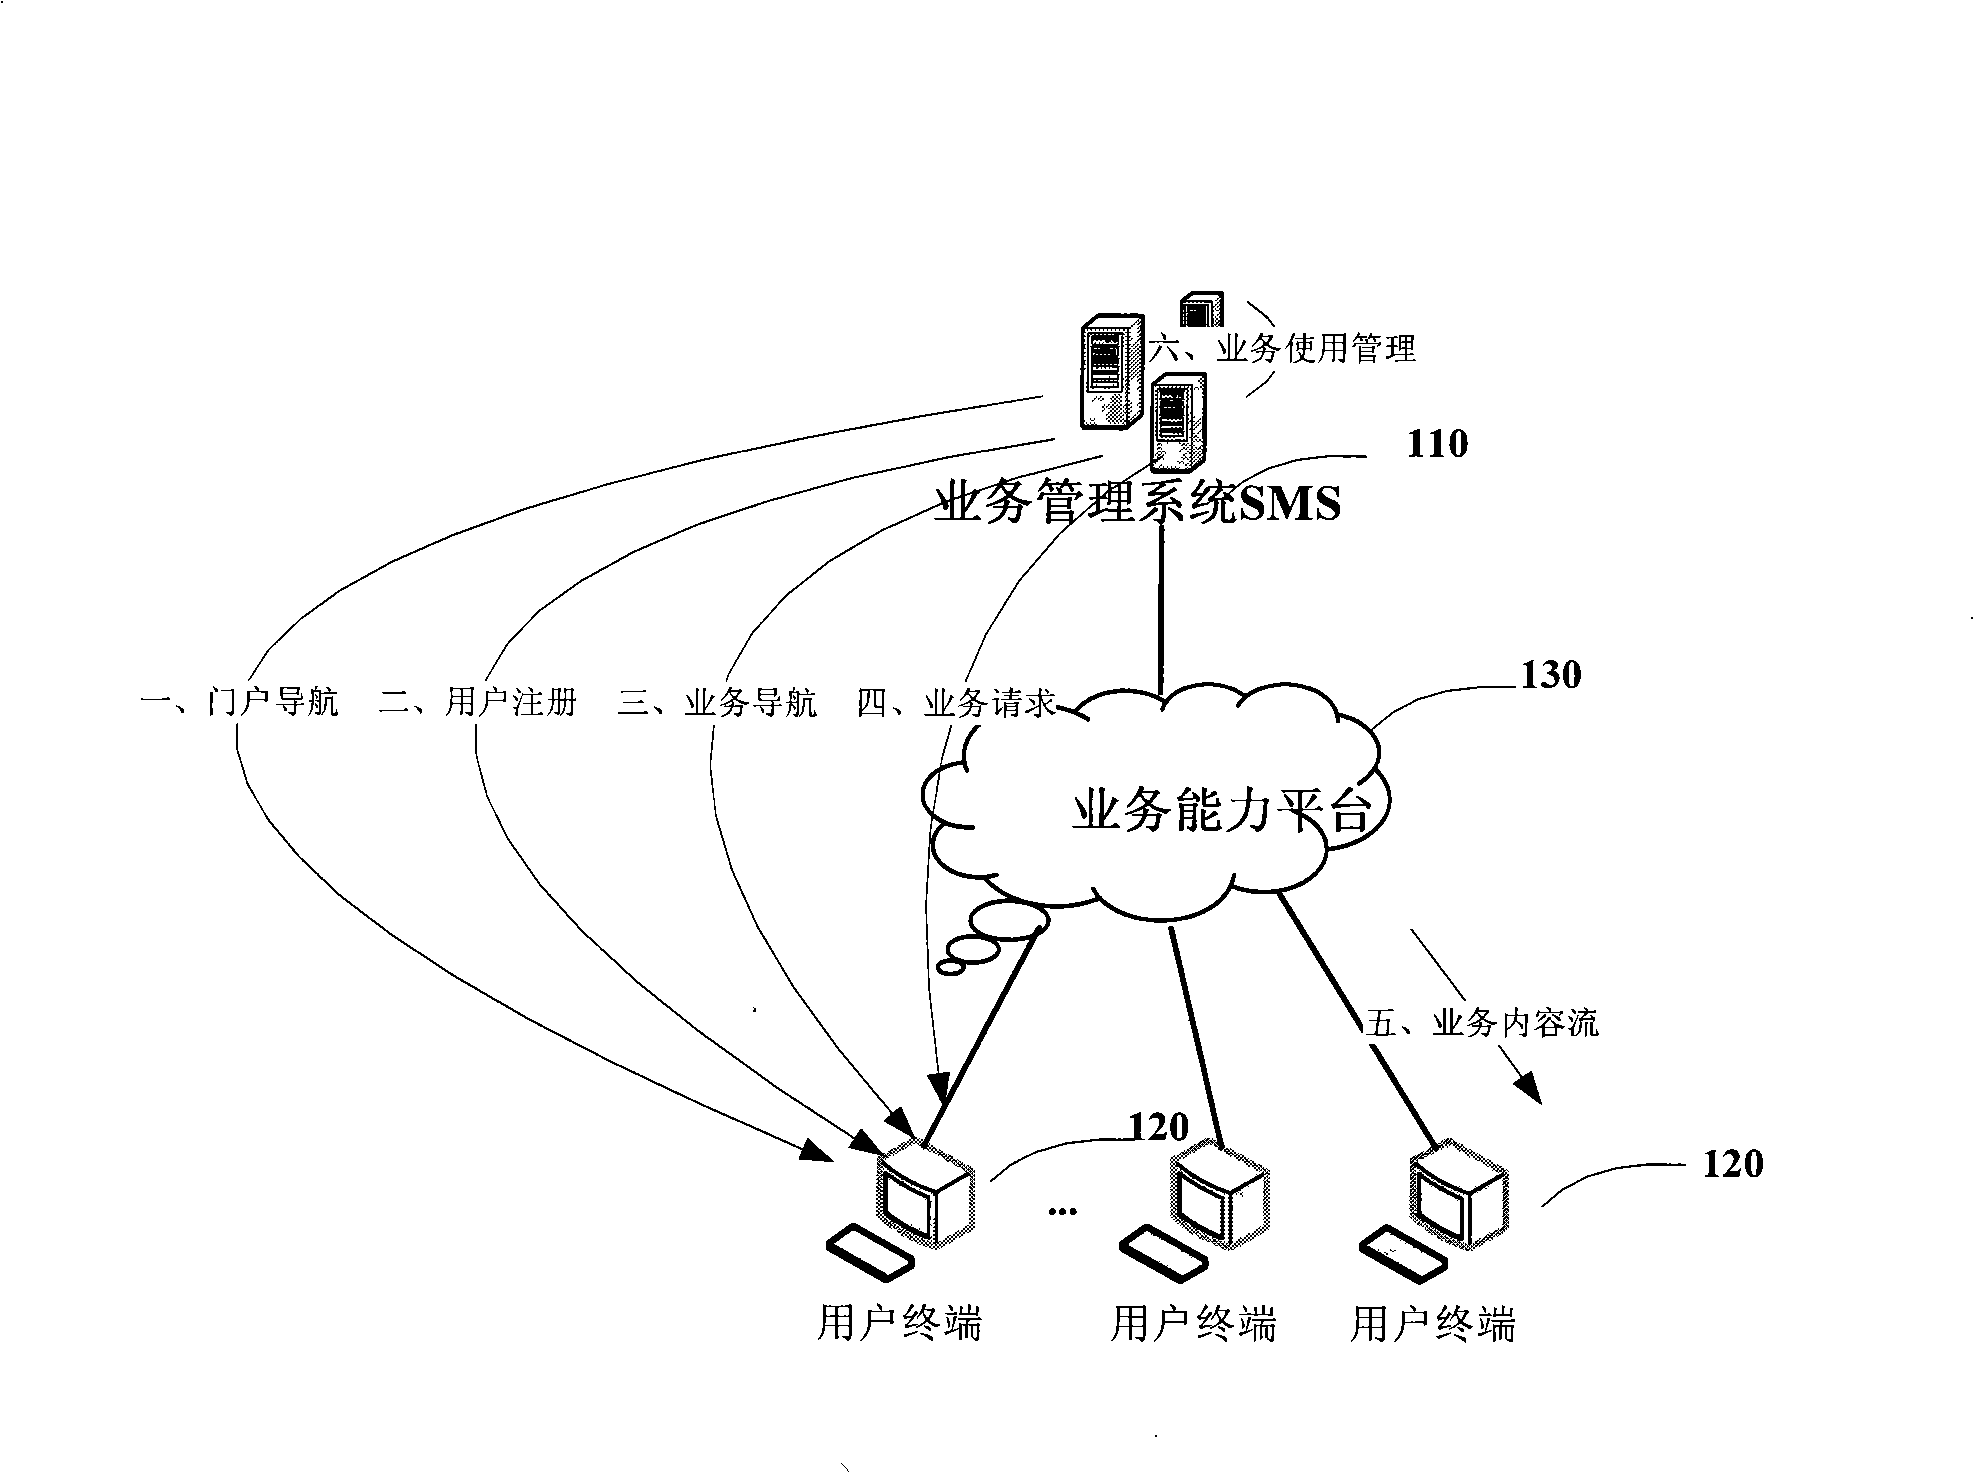 Unification video signal system and method with separated business management and business control